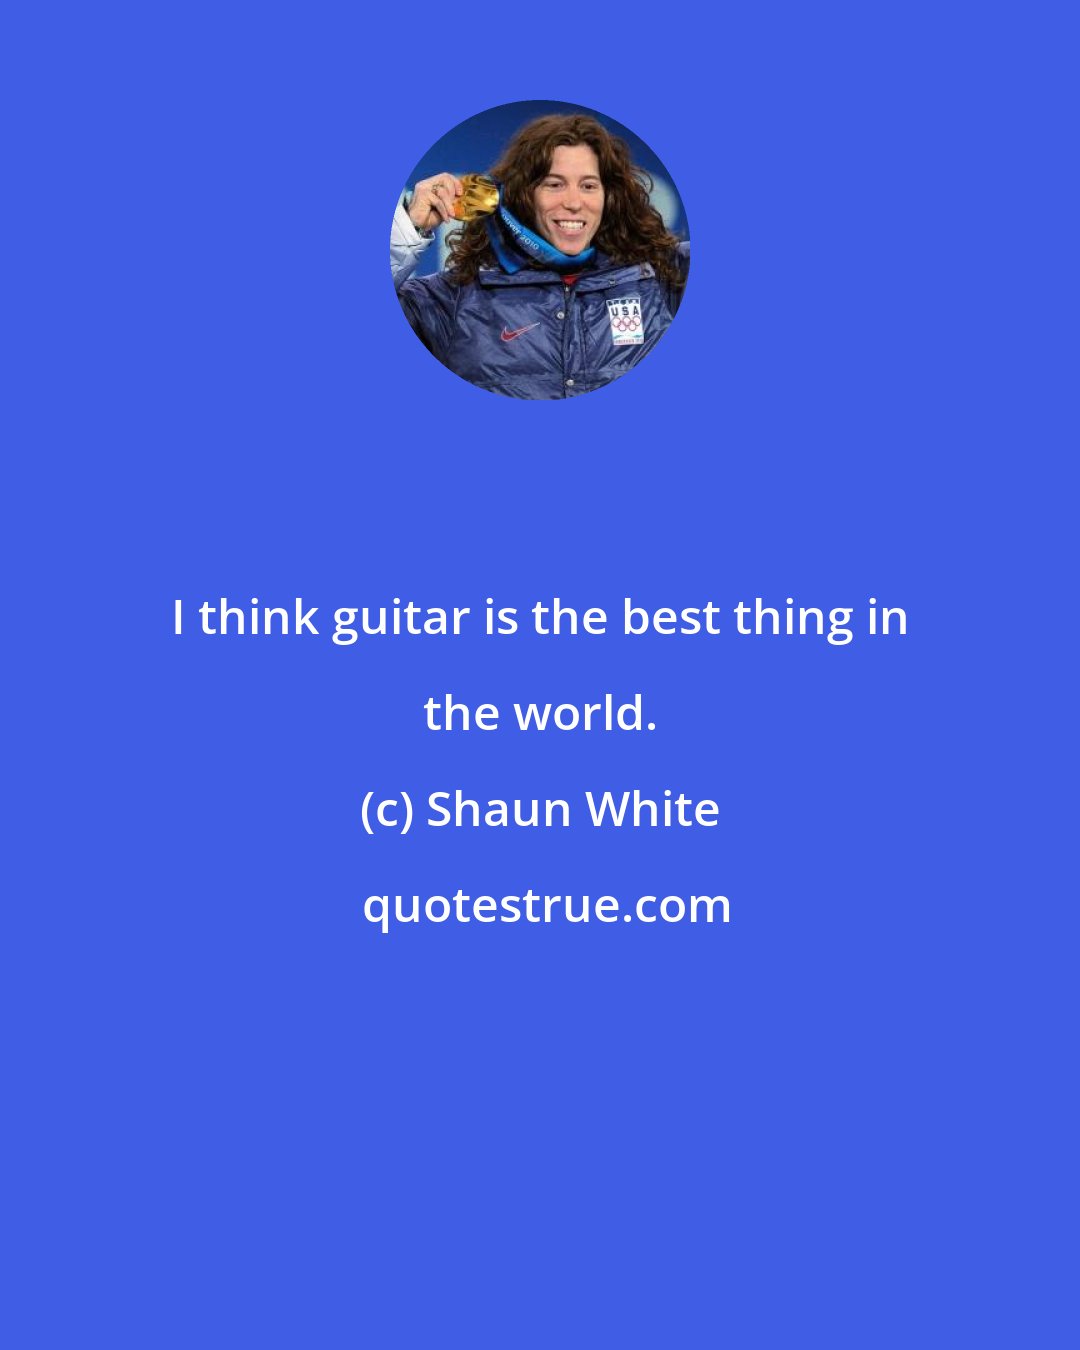 Shaun White: I think guitar is the best thing in the world.